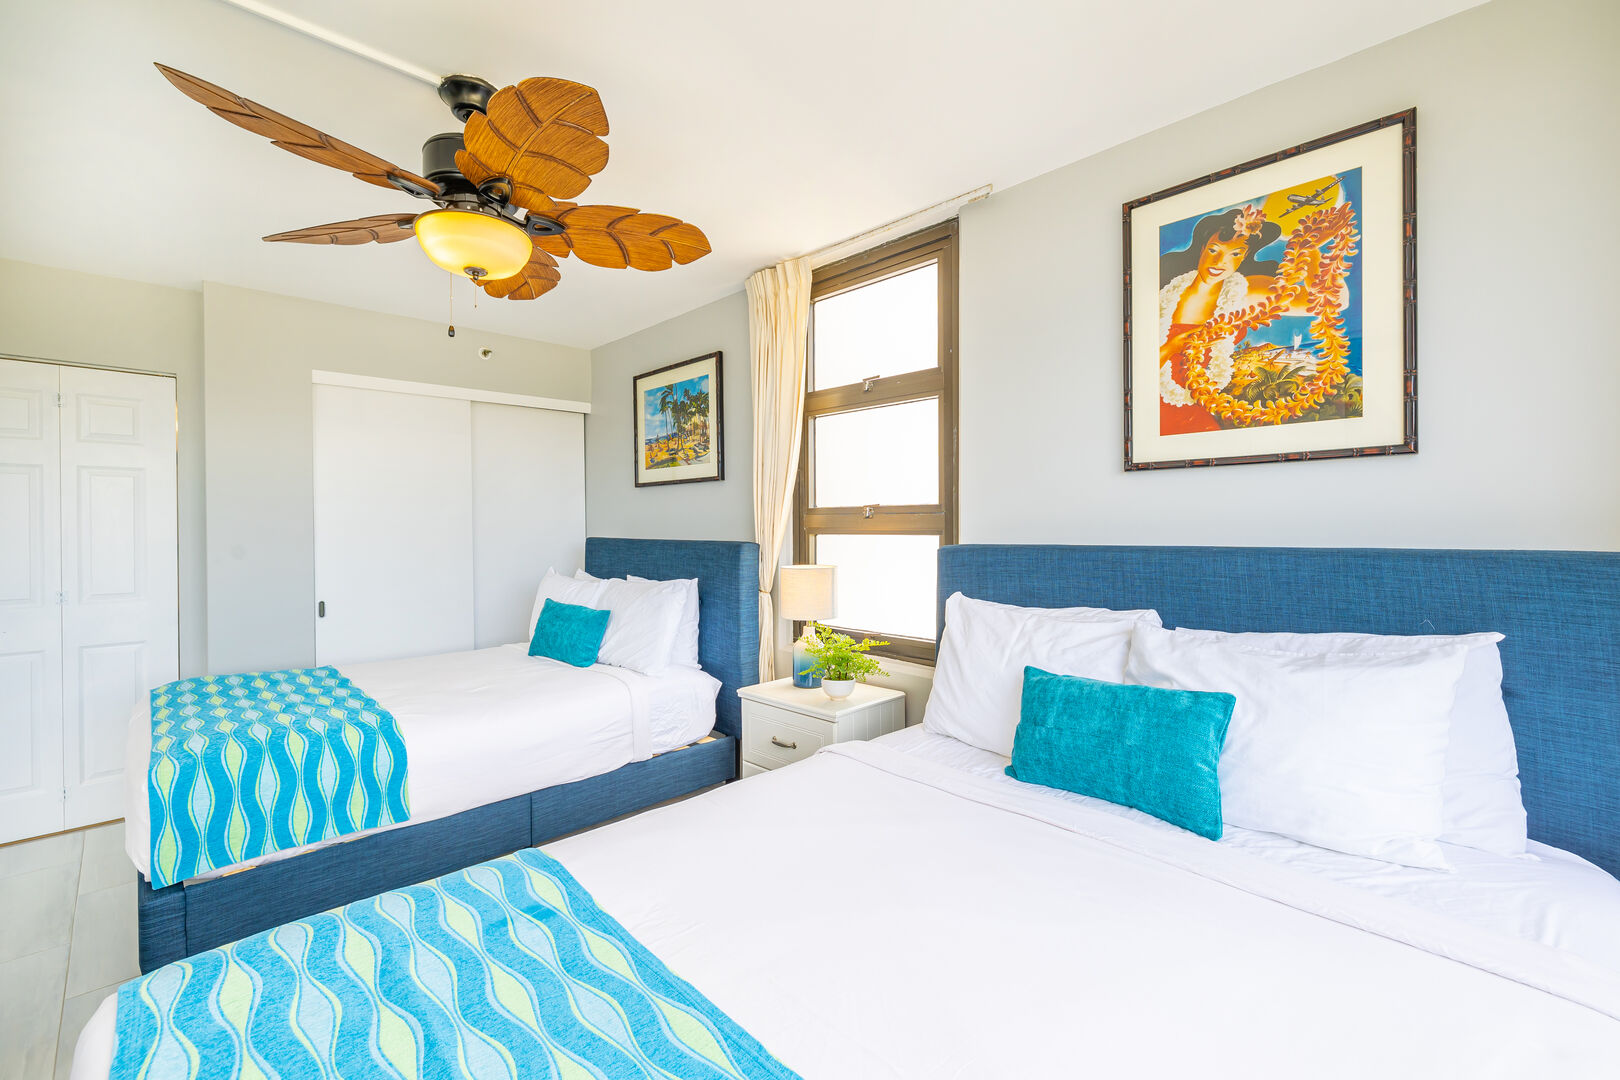 The bedroom has a queen-size bed, 1 full-size bed, and ceiling fan!